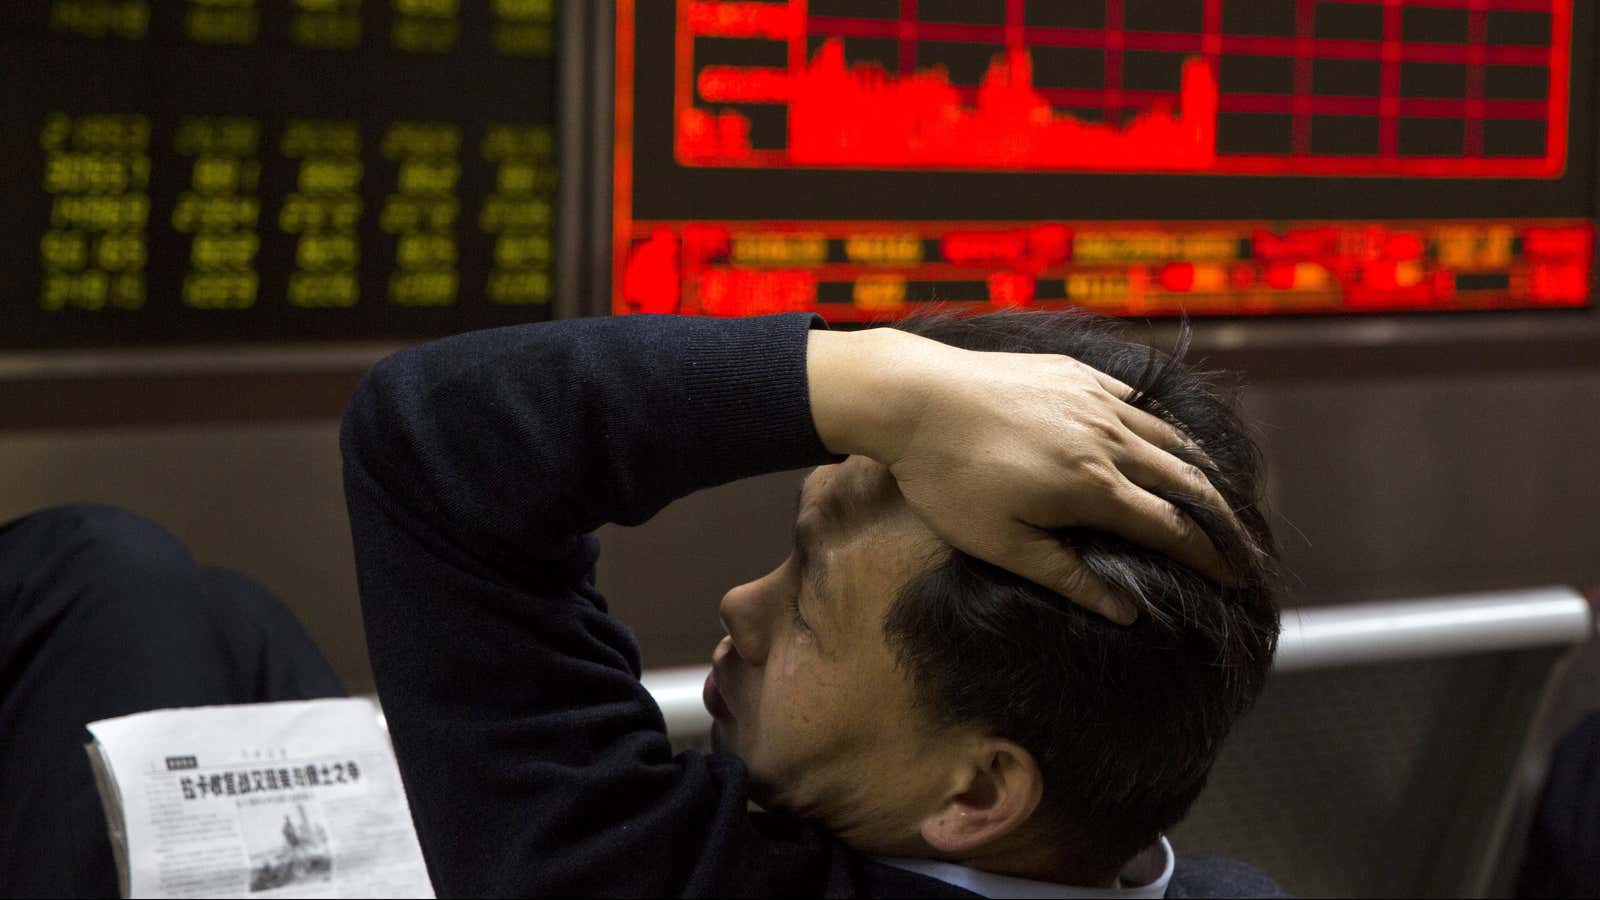 A Chinese man reacts near a board showing the Shanghai Stock Exchange Composite Index at a brokerage in Beijing, China, Wednesday, Nov. 9, 2016. The…